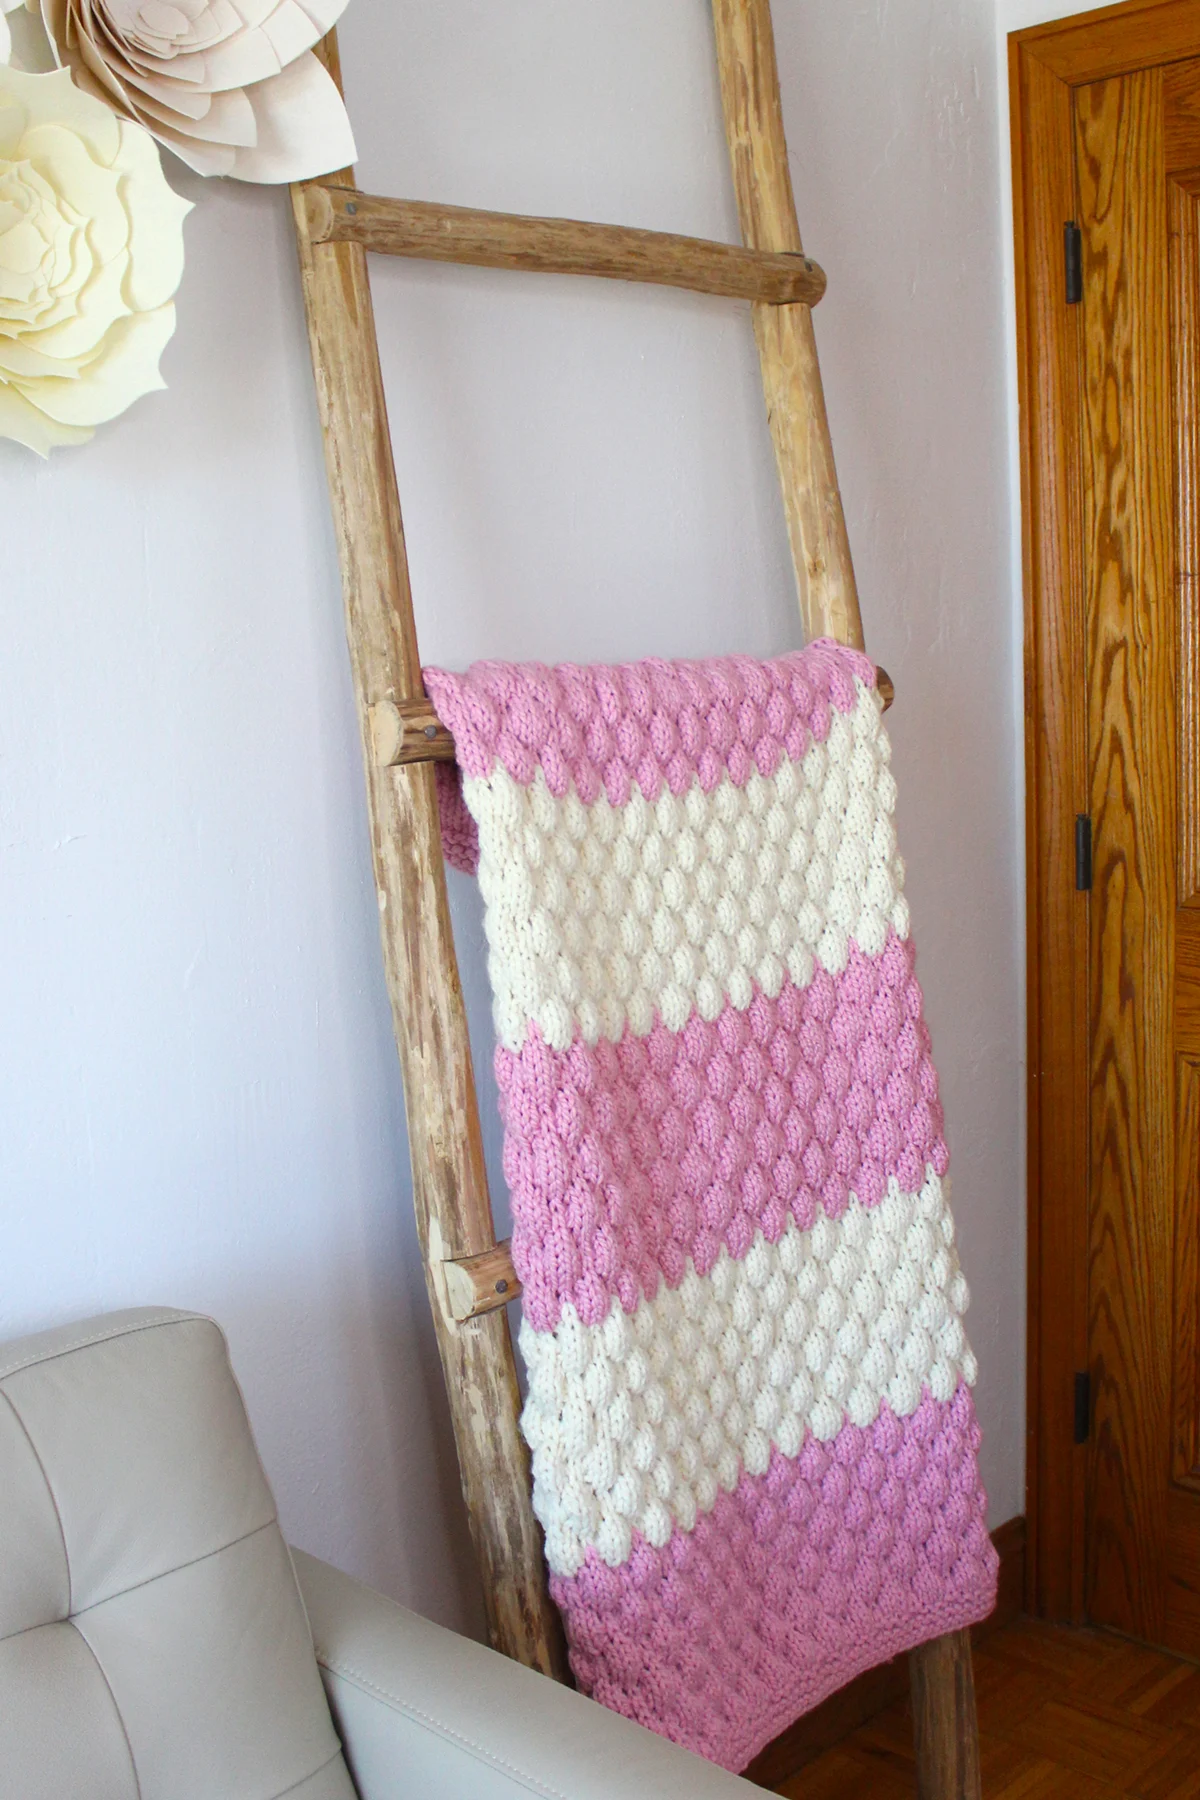 Chunky bubble stitch blanket in pink and white yarn colors displayed on rustic ladder.